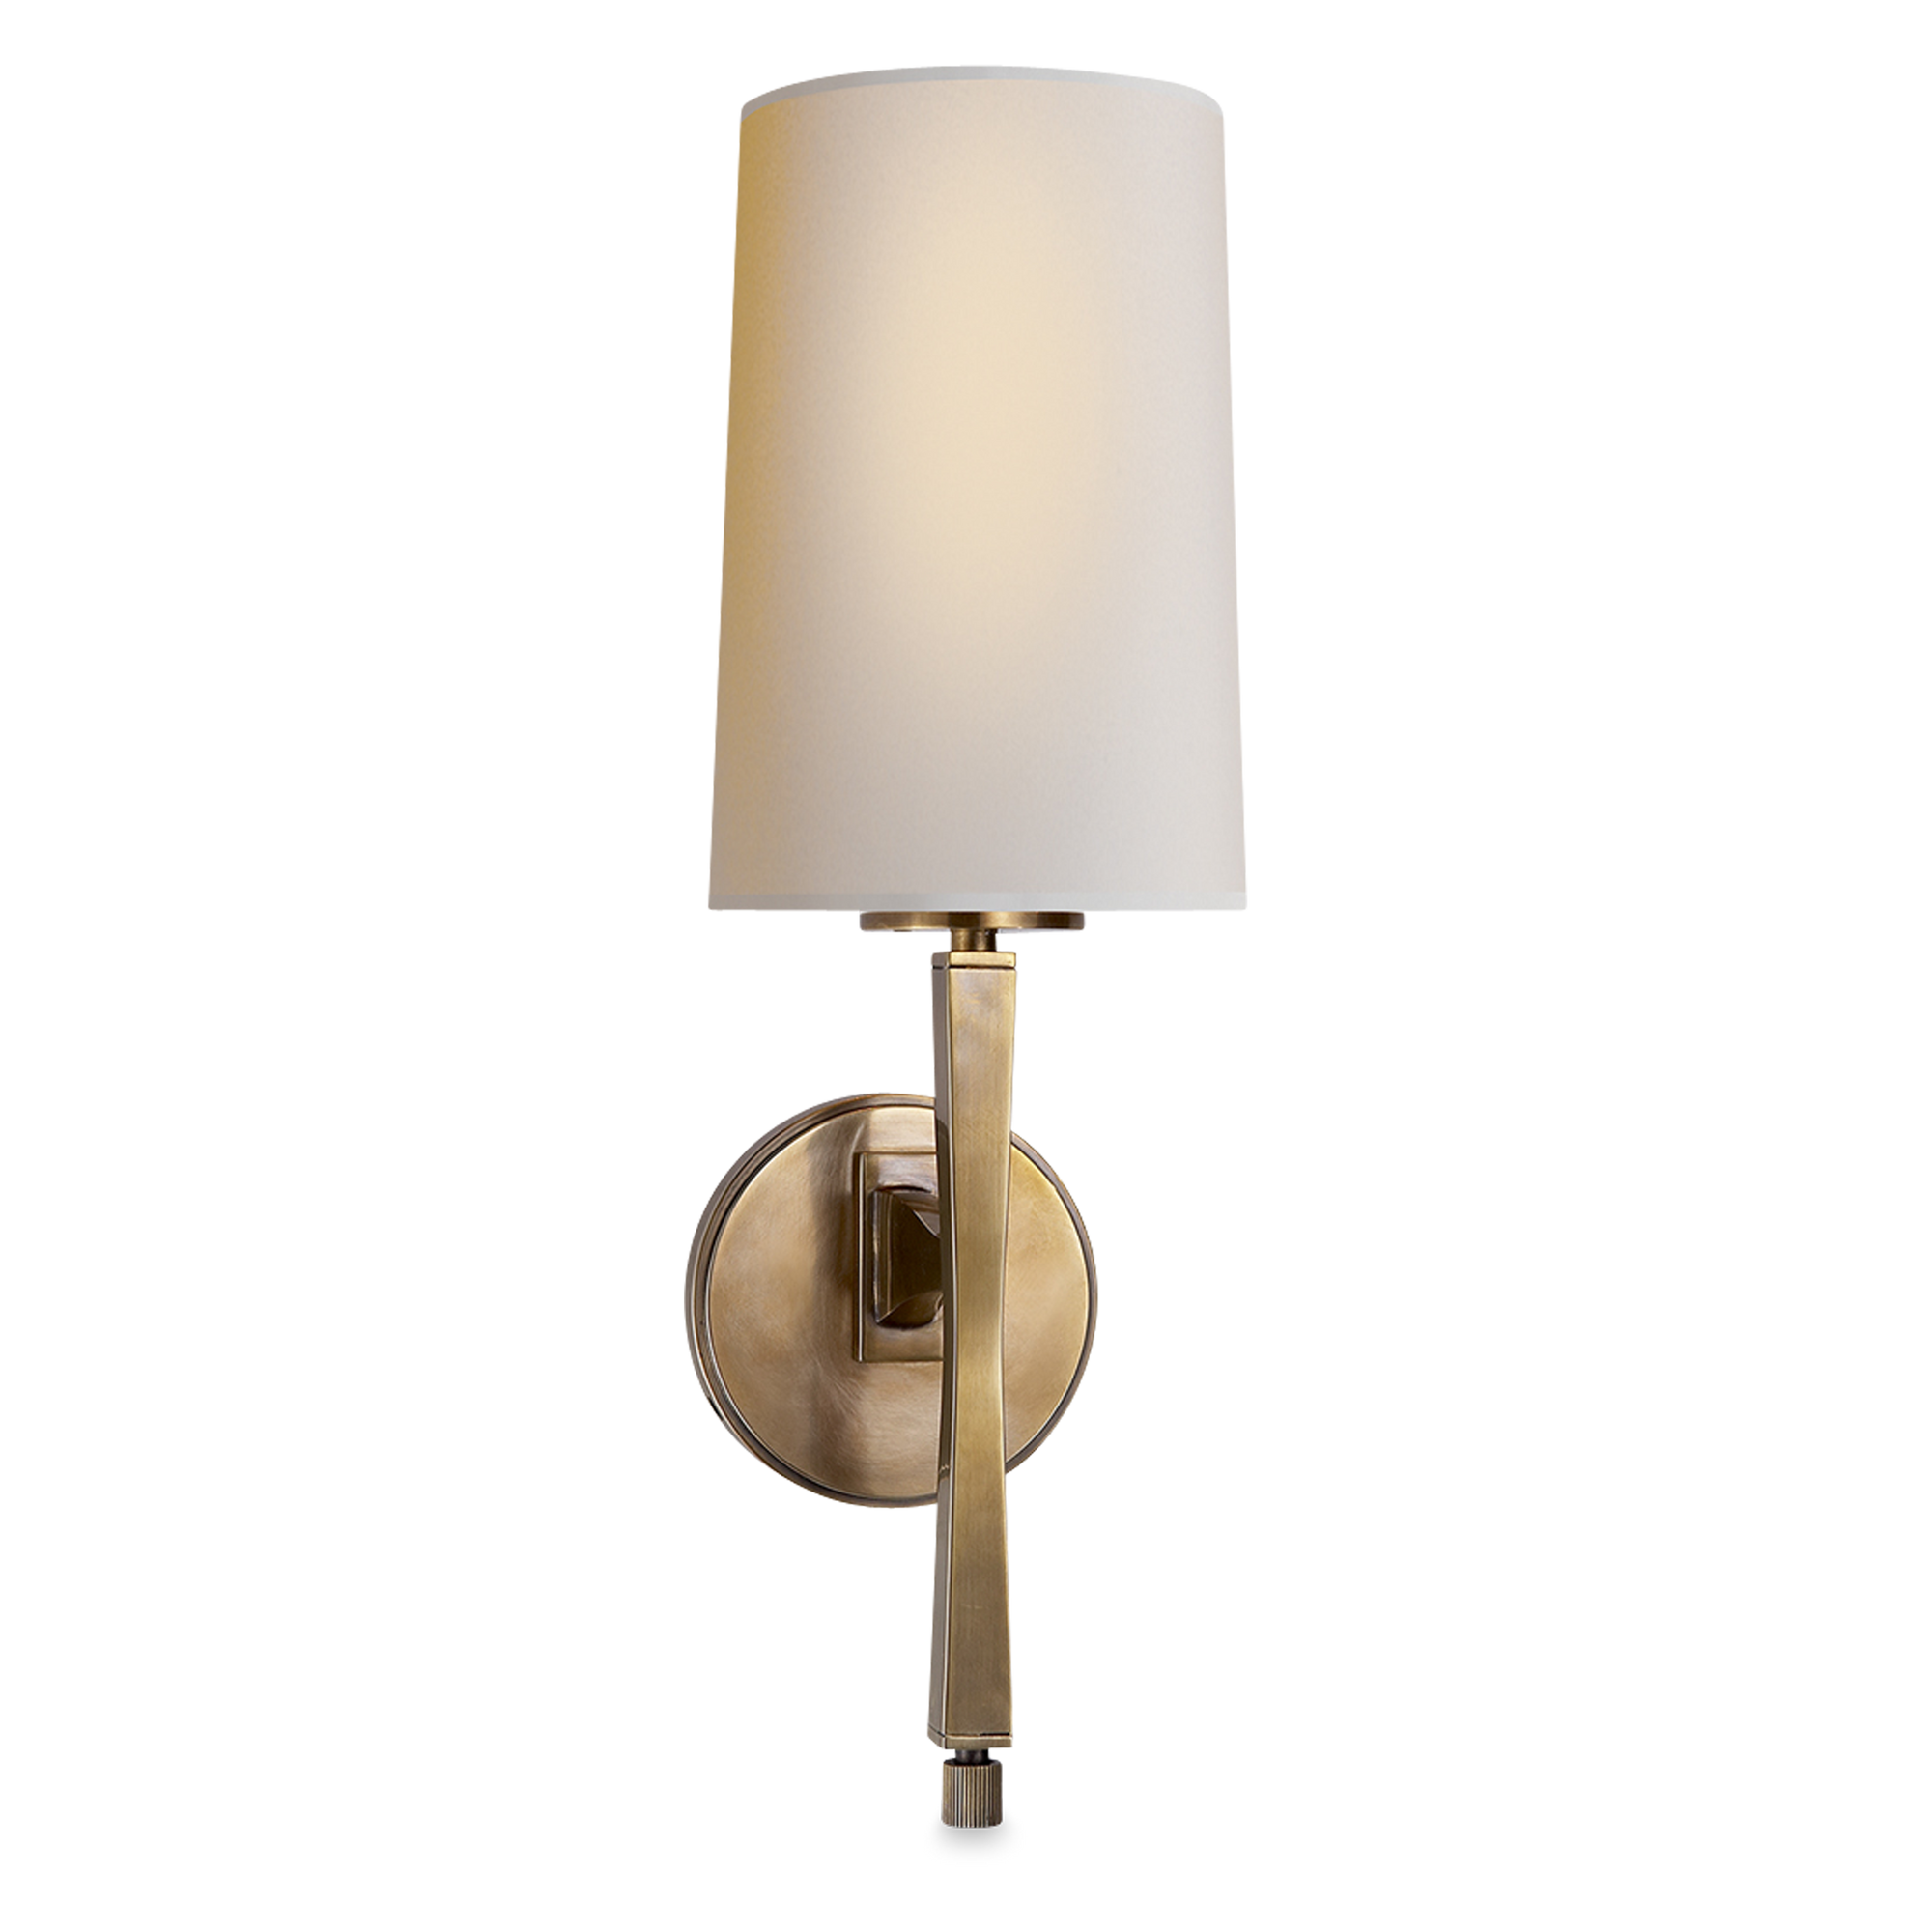 Classic wall sconce that is the perfect mix of form and function.